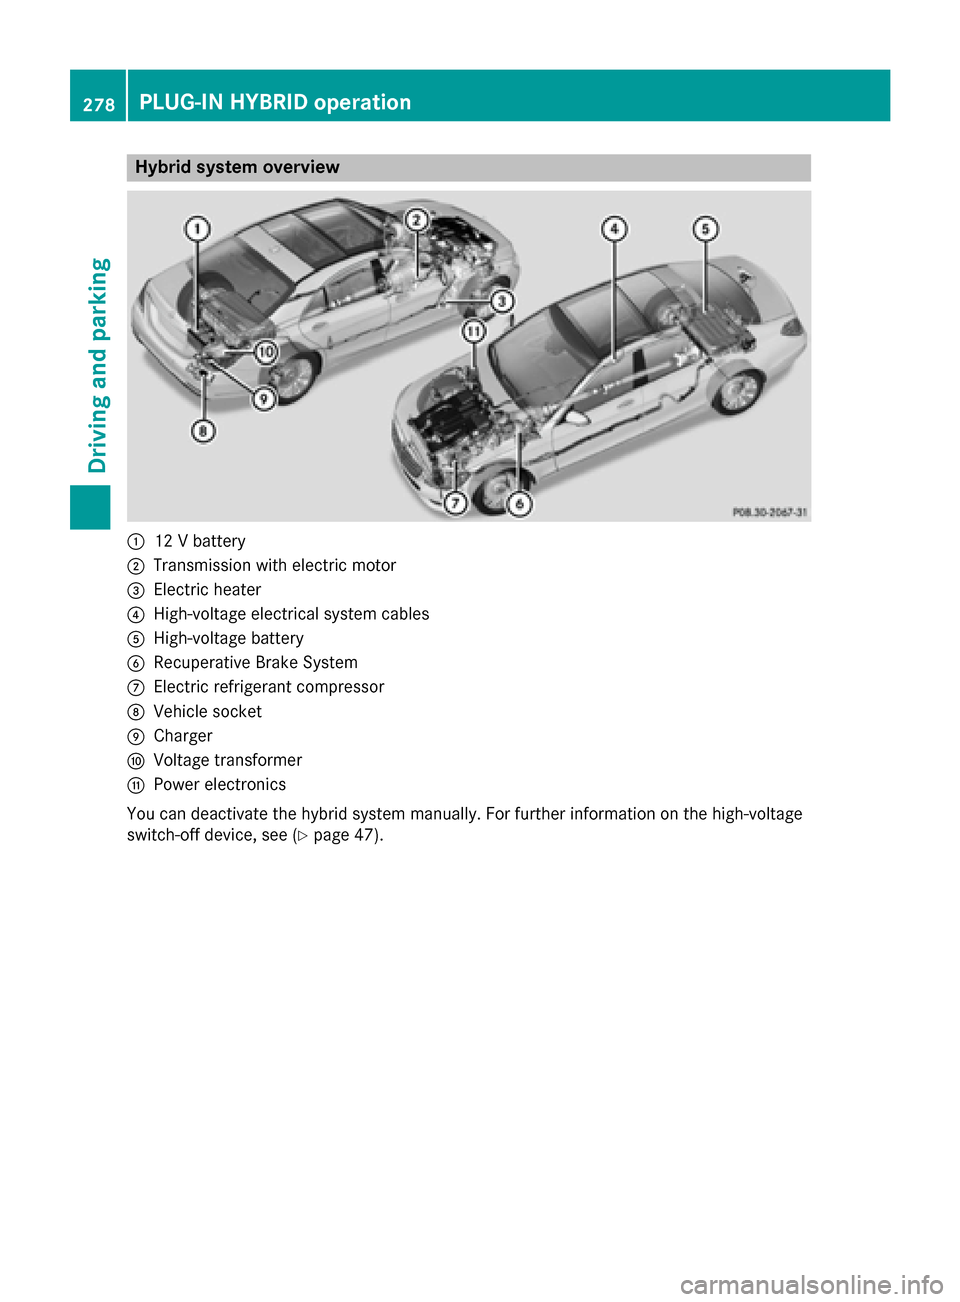 MERCEDES-BENZ S-Class 2015 W222 Workshop Manual Hybrid system overview
:
12 V battery
; Transmission with electric motor
= Electric heater
? High-voltage electrical system cables
A High-voltage battery
B Recuperative Brake System
C Electric refrige